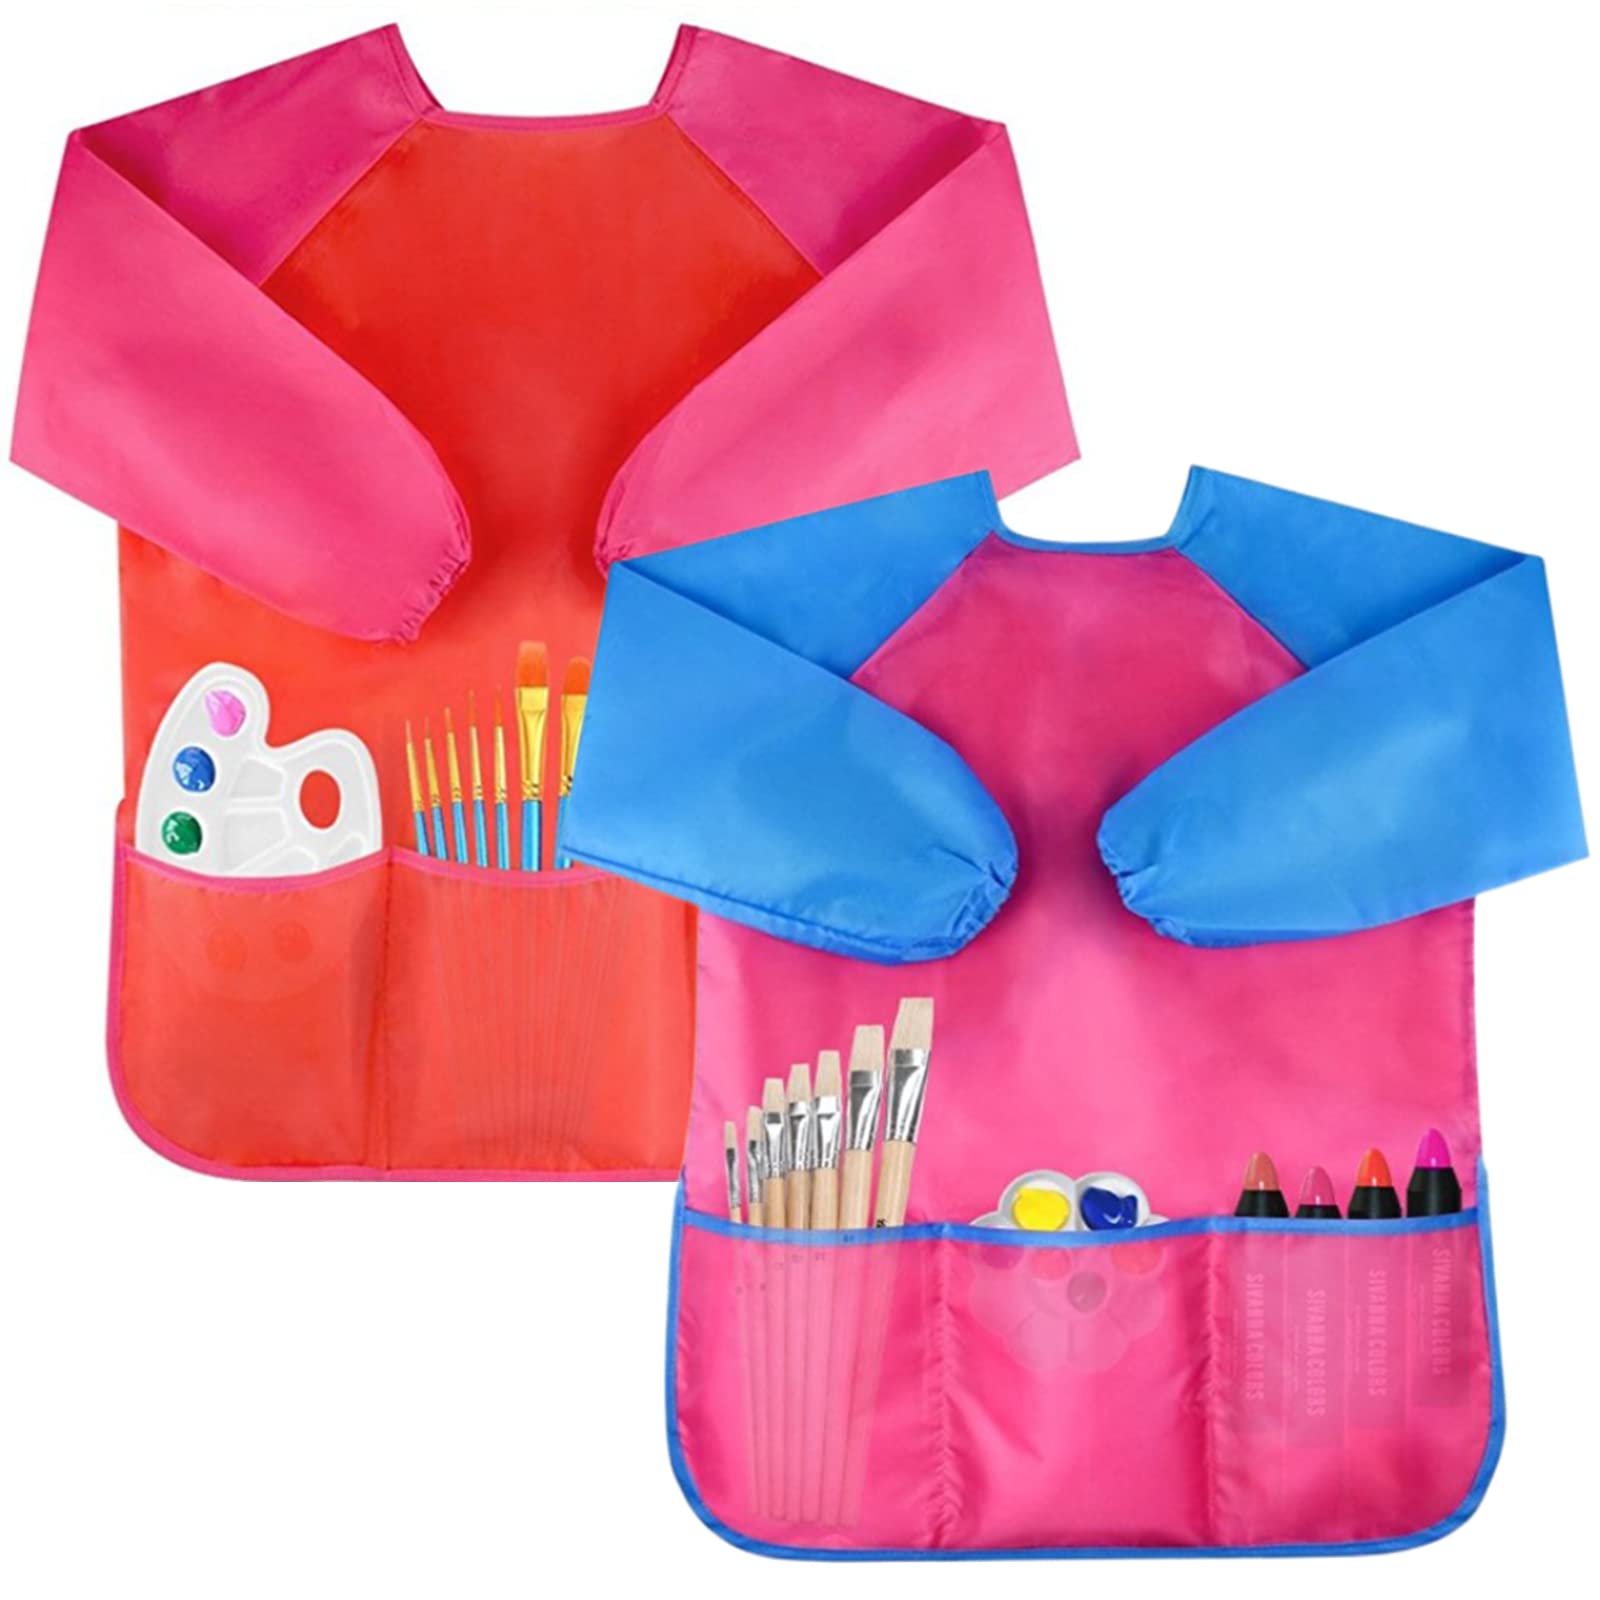 Bassion 2 Pack Kids Art Smocks Toddler Smock Waterproof Artist Painting Aprons Long Sleeve with 3 Pockets for Age 2-6 Years